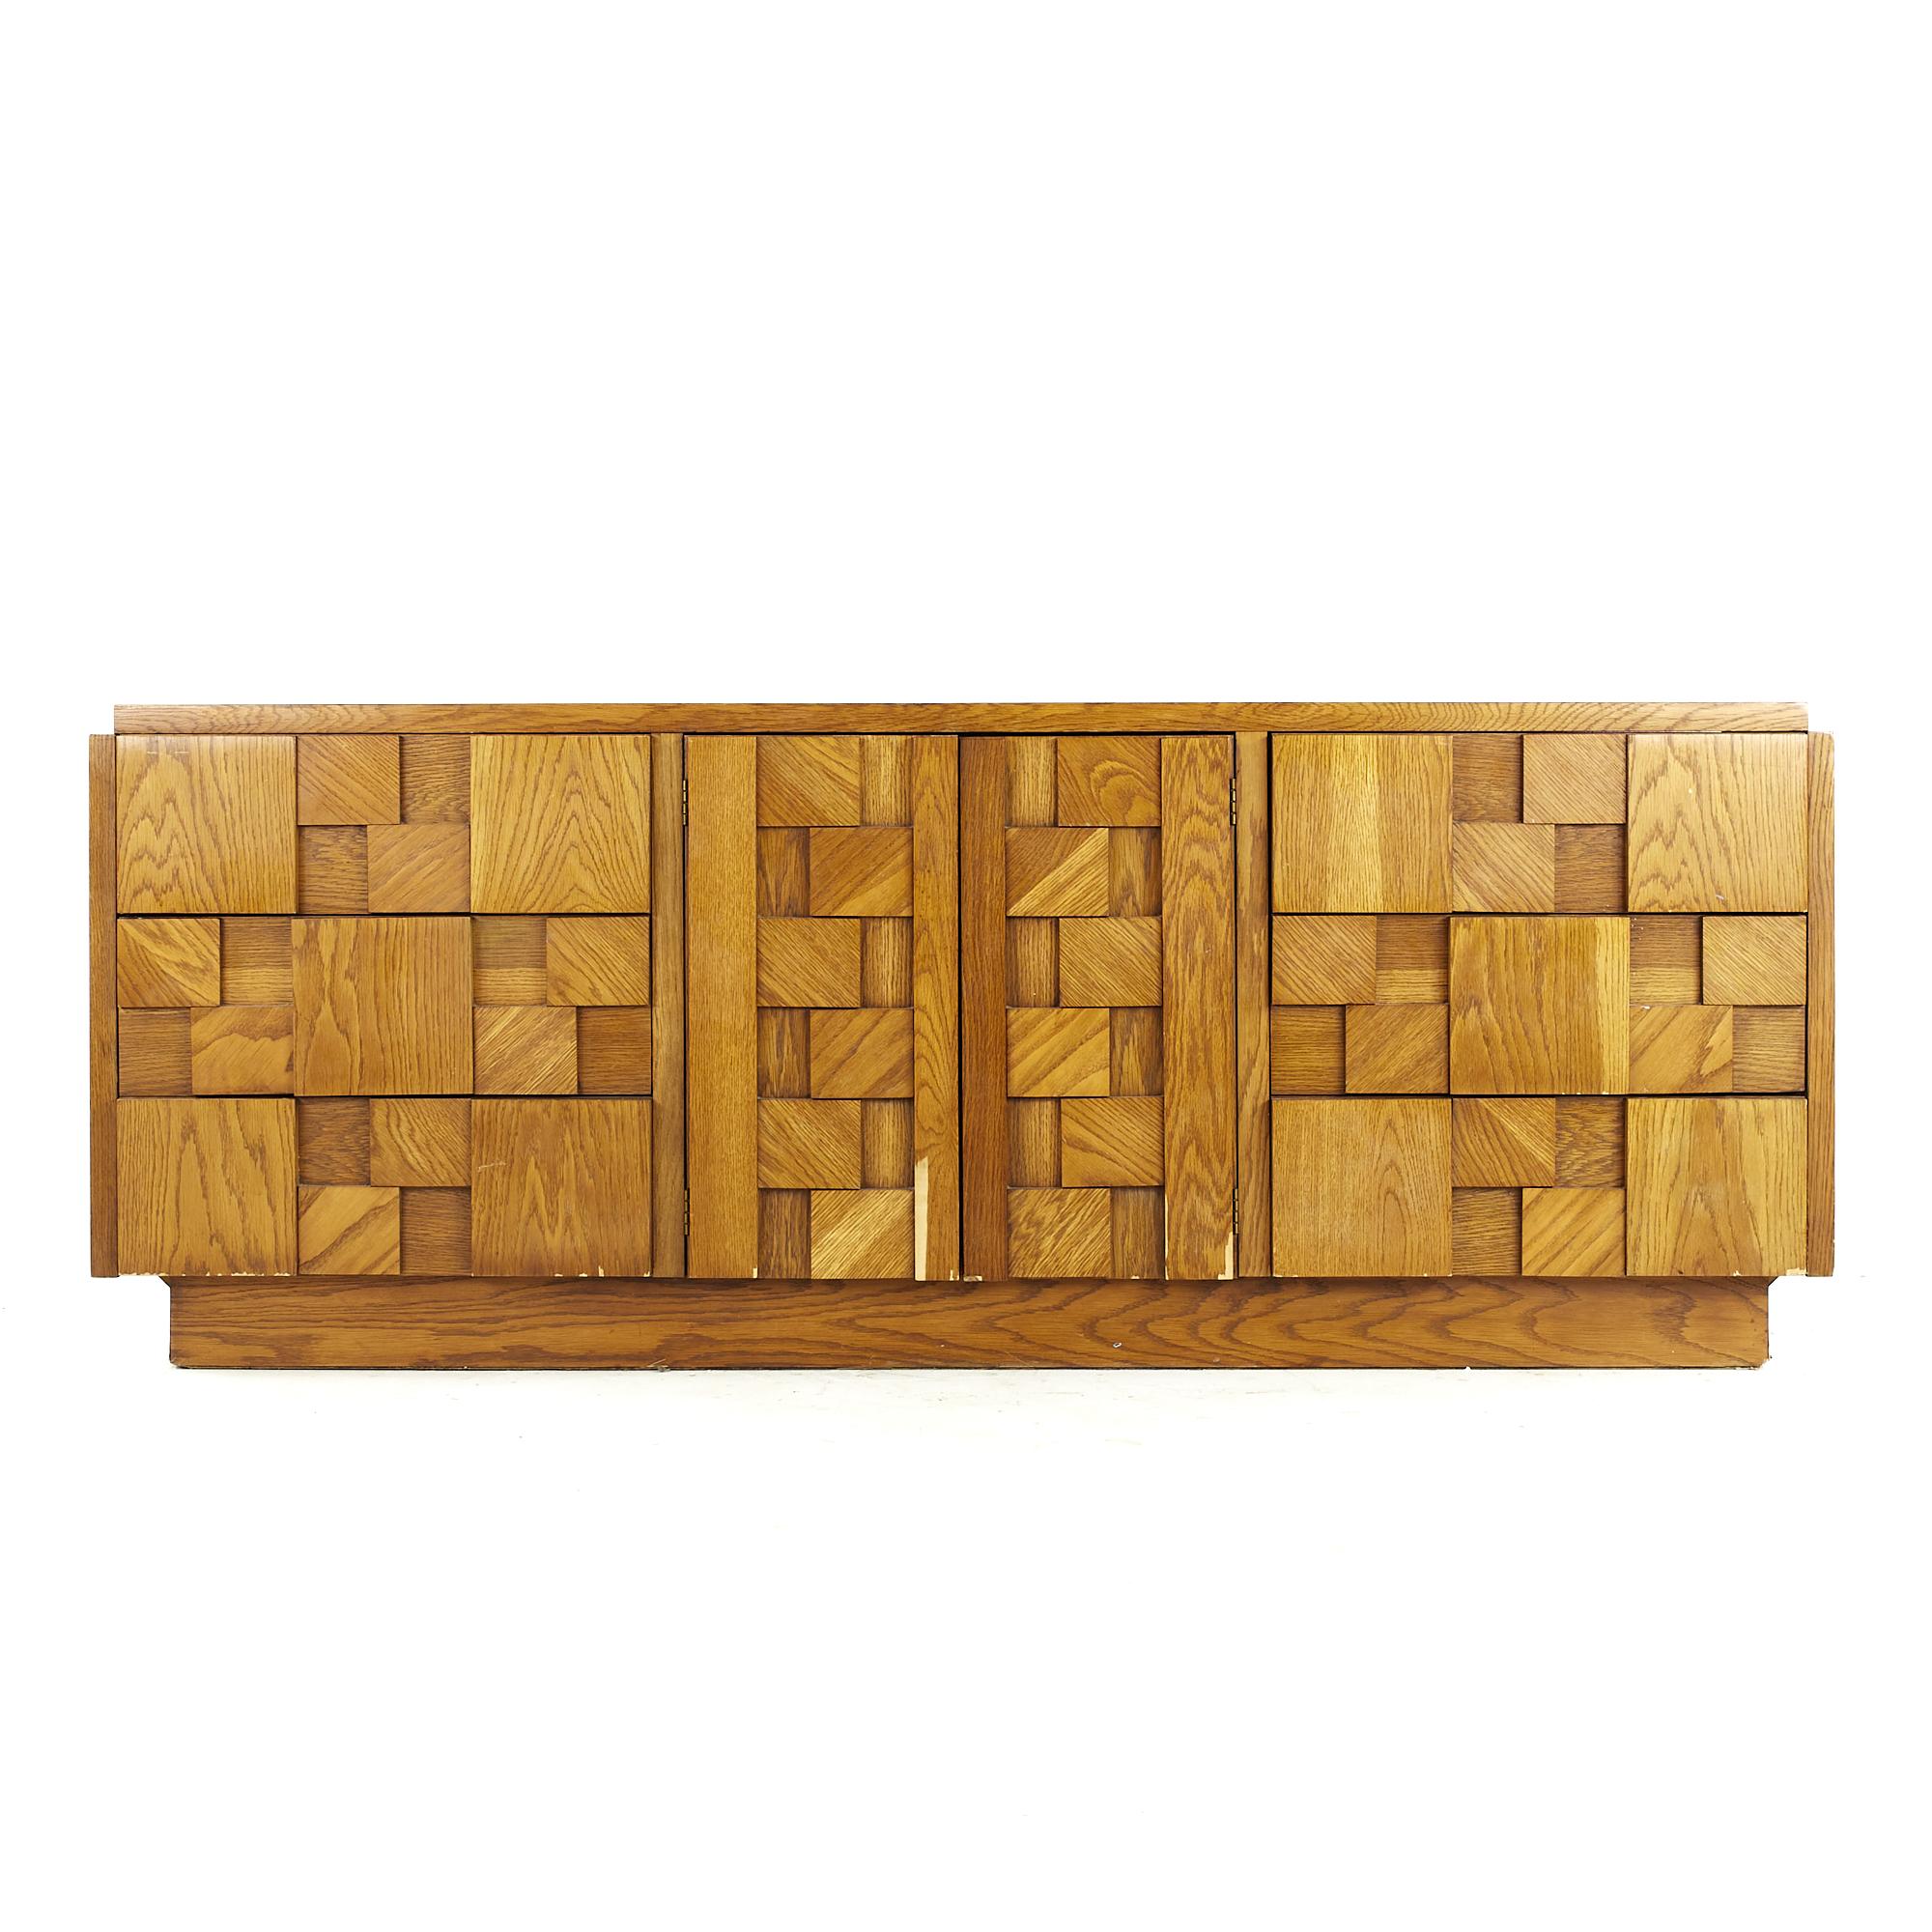 Lane Staccato Brutalist midcentury Oak Lowboy Dresser

This lowboy measures: 78 wide x 19 deep x 30 inches high

All pieces of furniture can be had in what we call restored vintage condition. That means the piece is restored upon purchase so